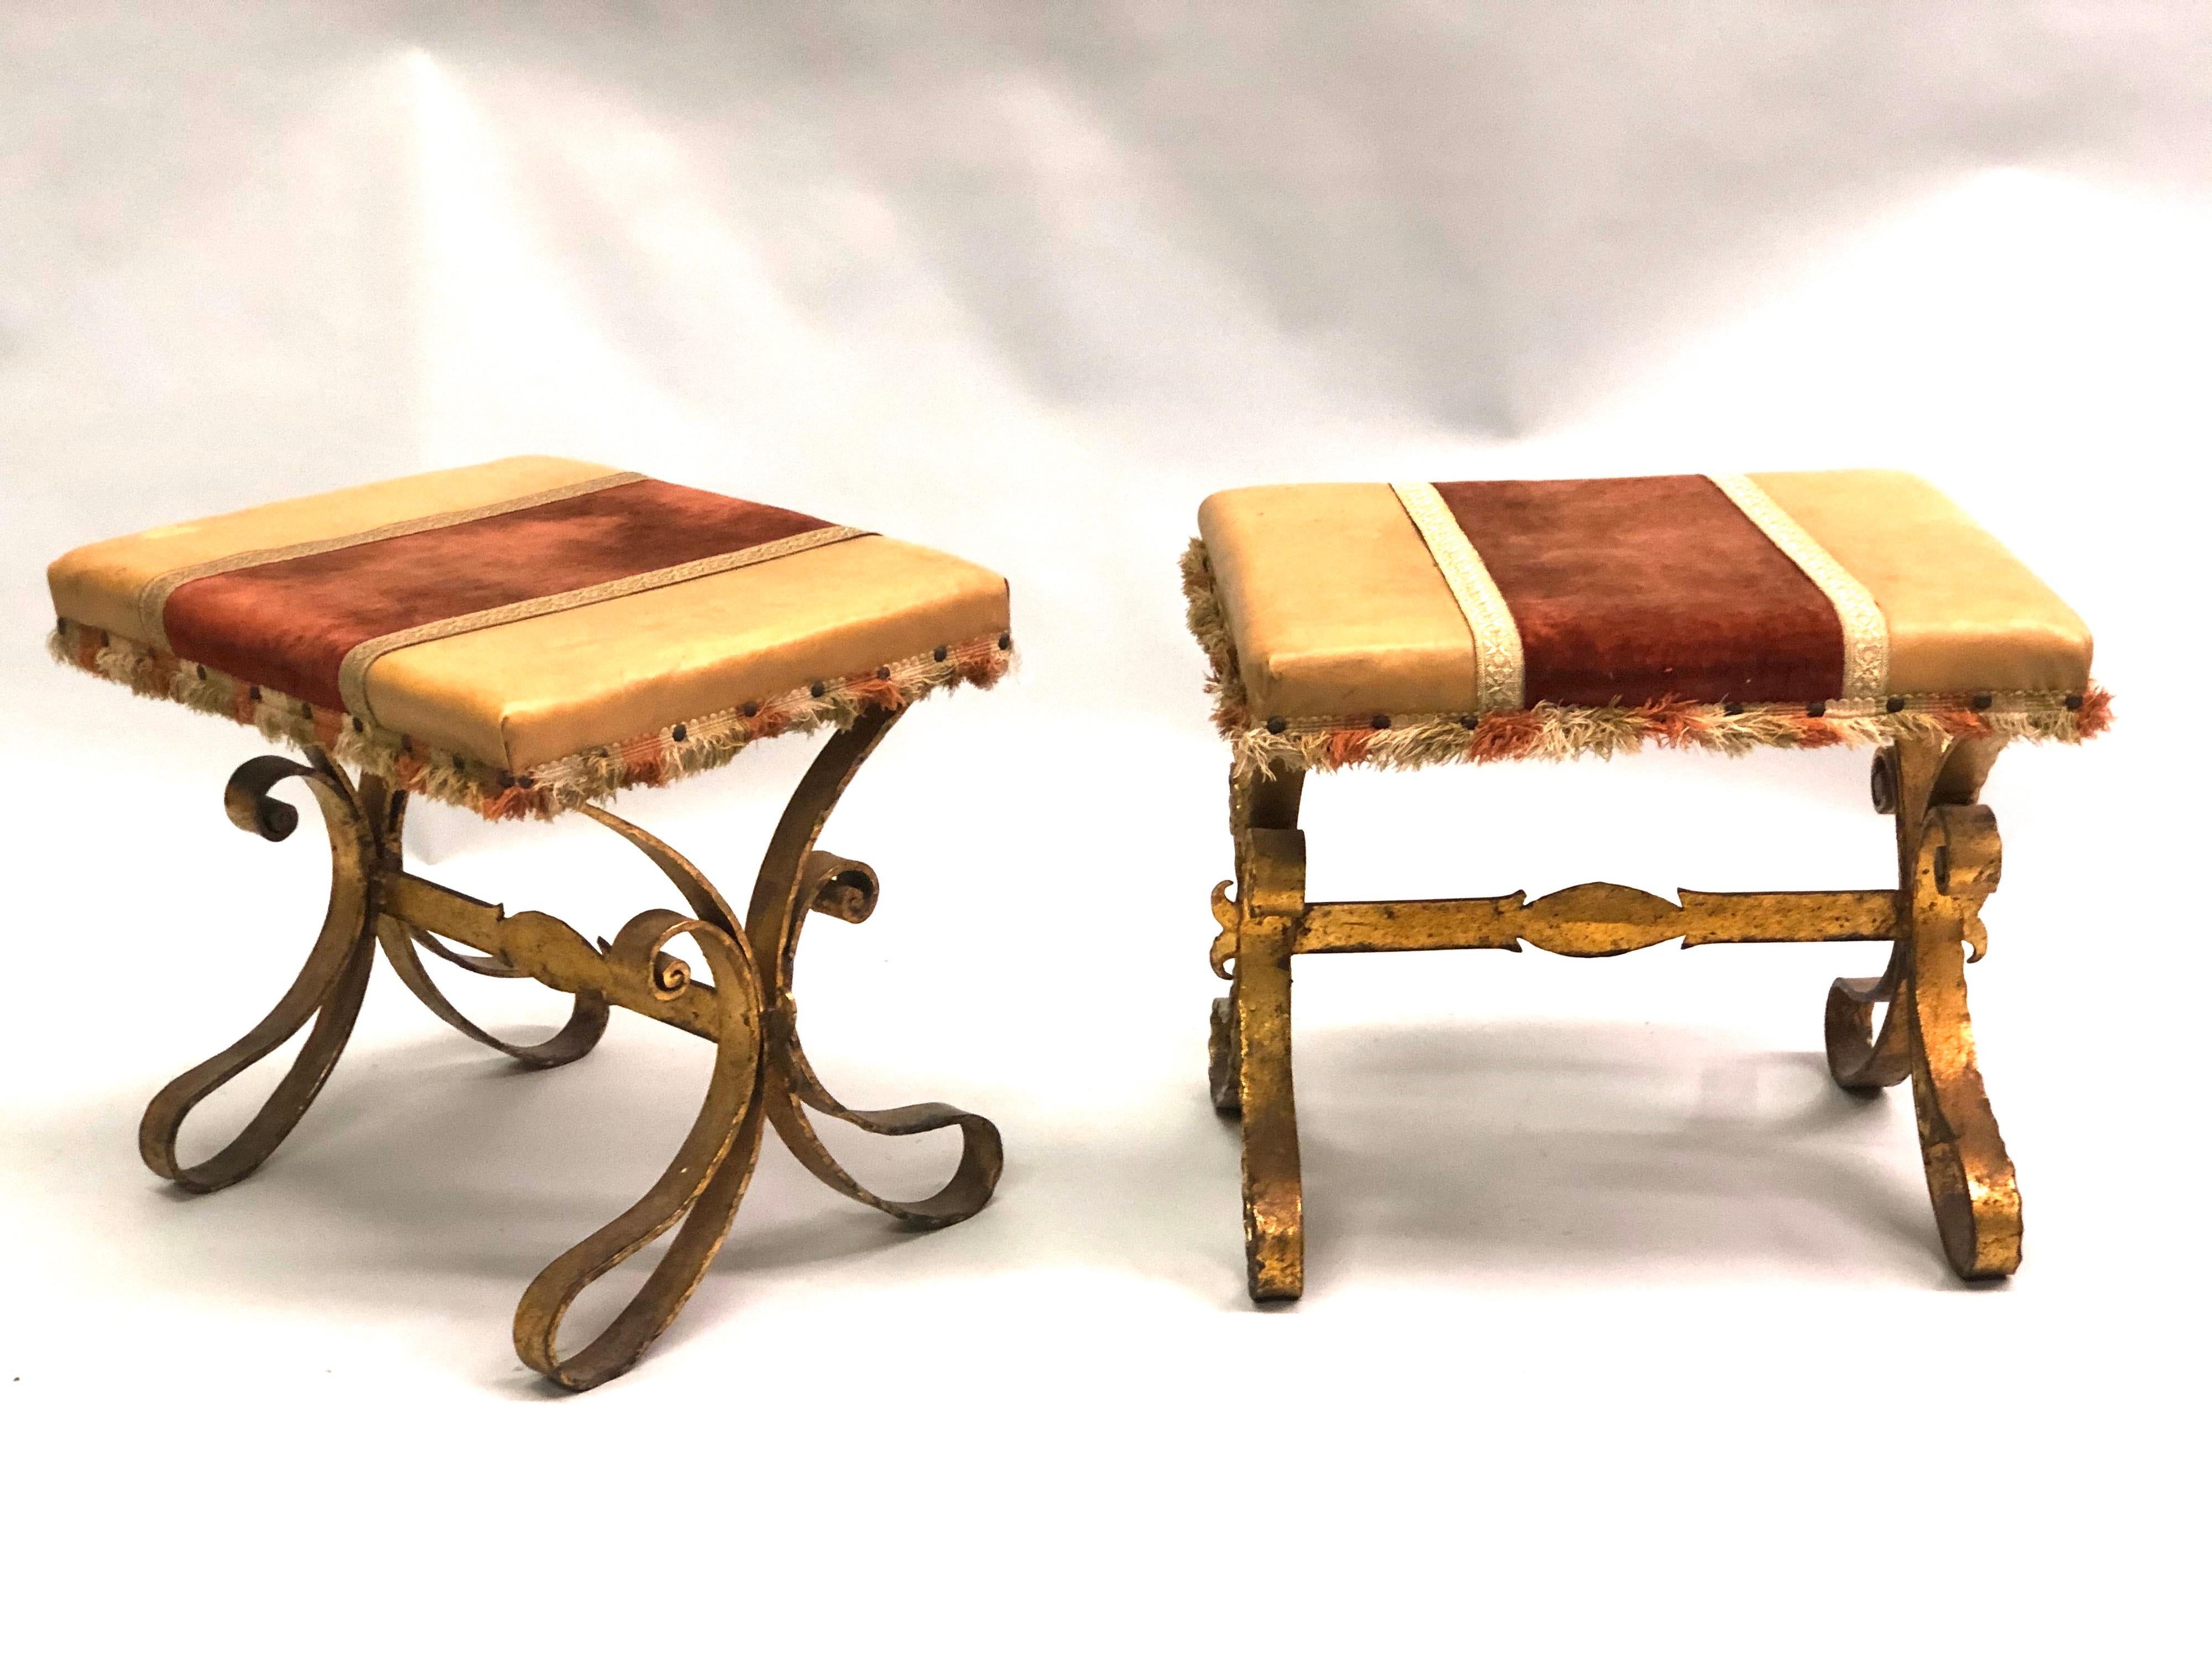 20th Century French Midcentury Gilt Wrought Iron and Leather Benches, Gilbert Poillerat, Pair